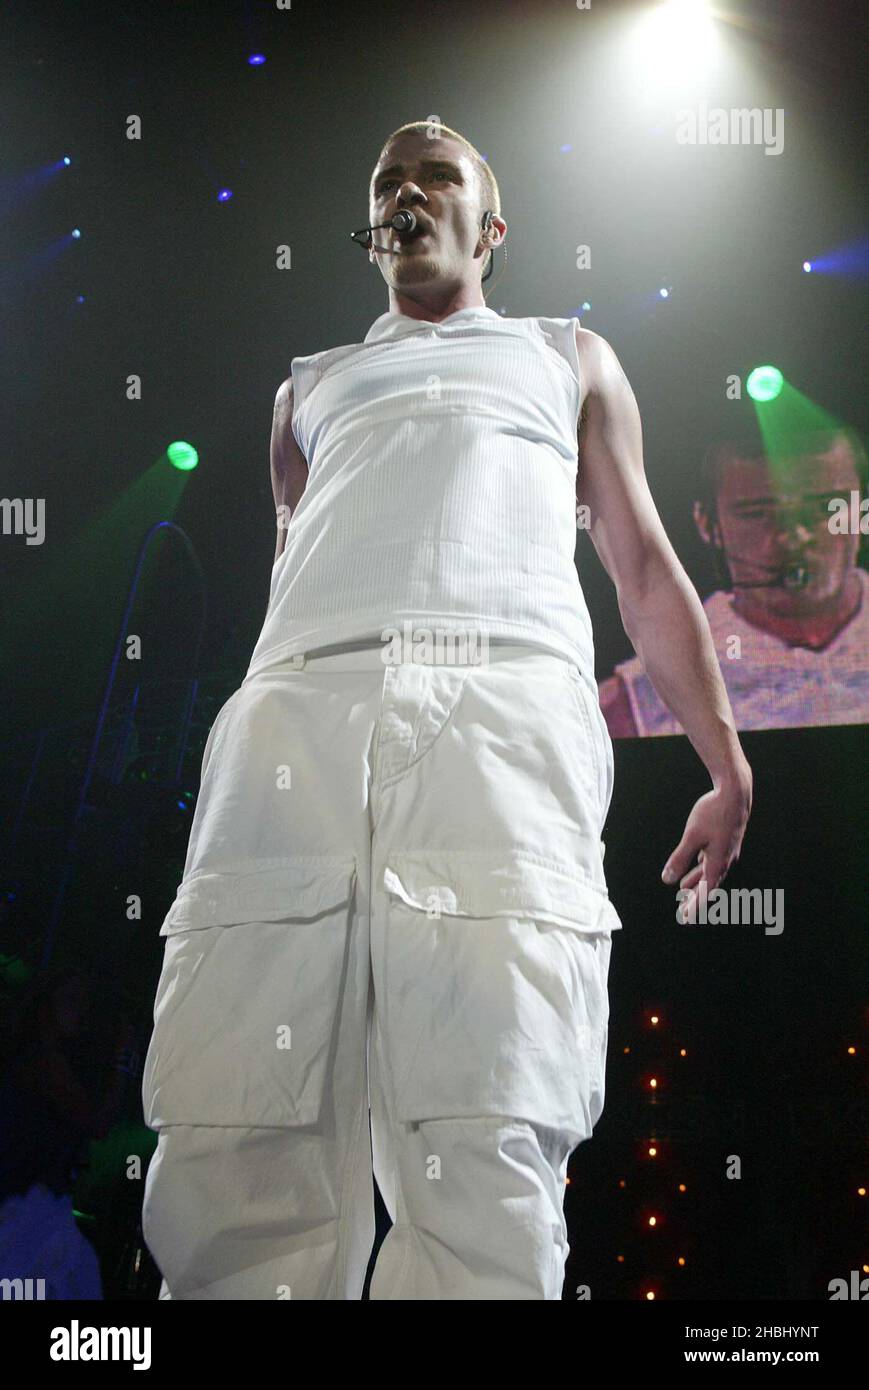 Justin Timberlake performs live on stage at the Sheffield Arena. Three quarter length, white vest, combat trousers. Stock Photo